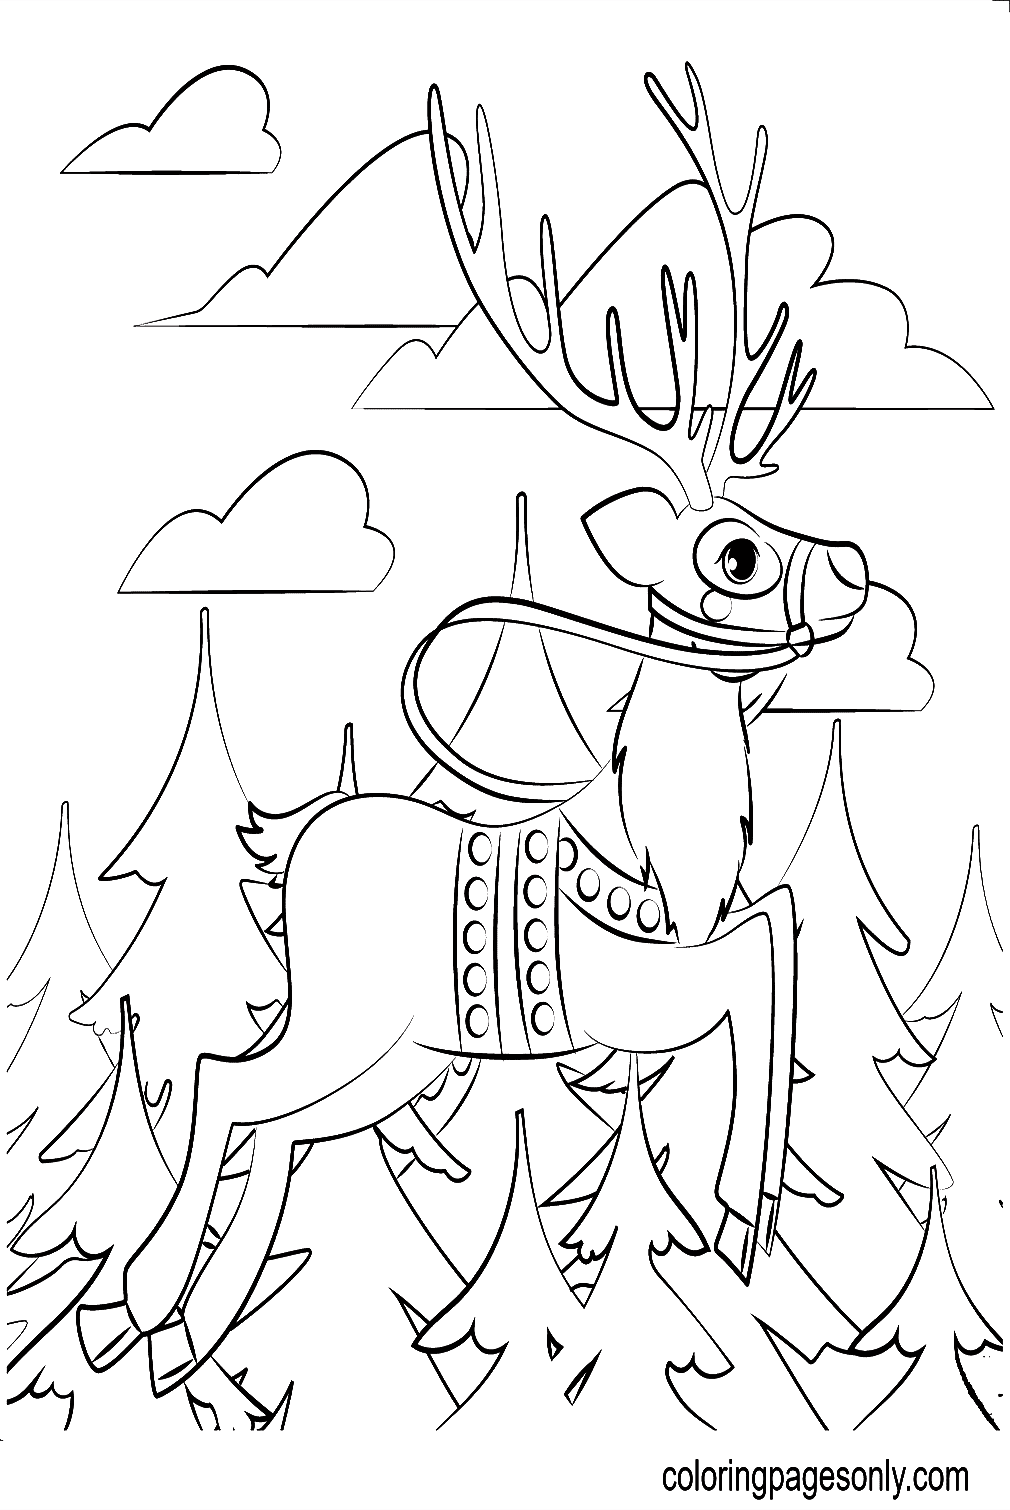 Reindeer Walking Through The Pine Forest Coloring Pages